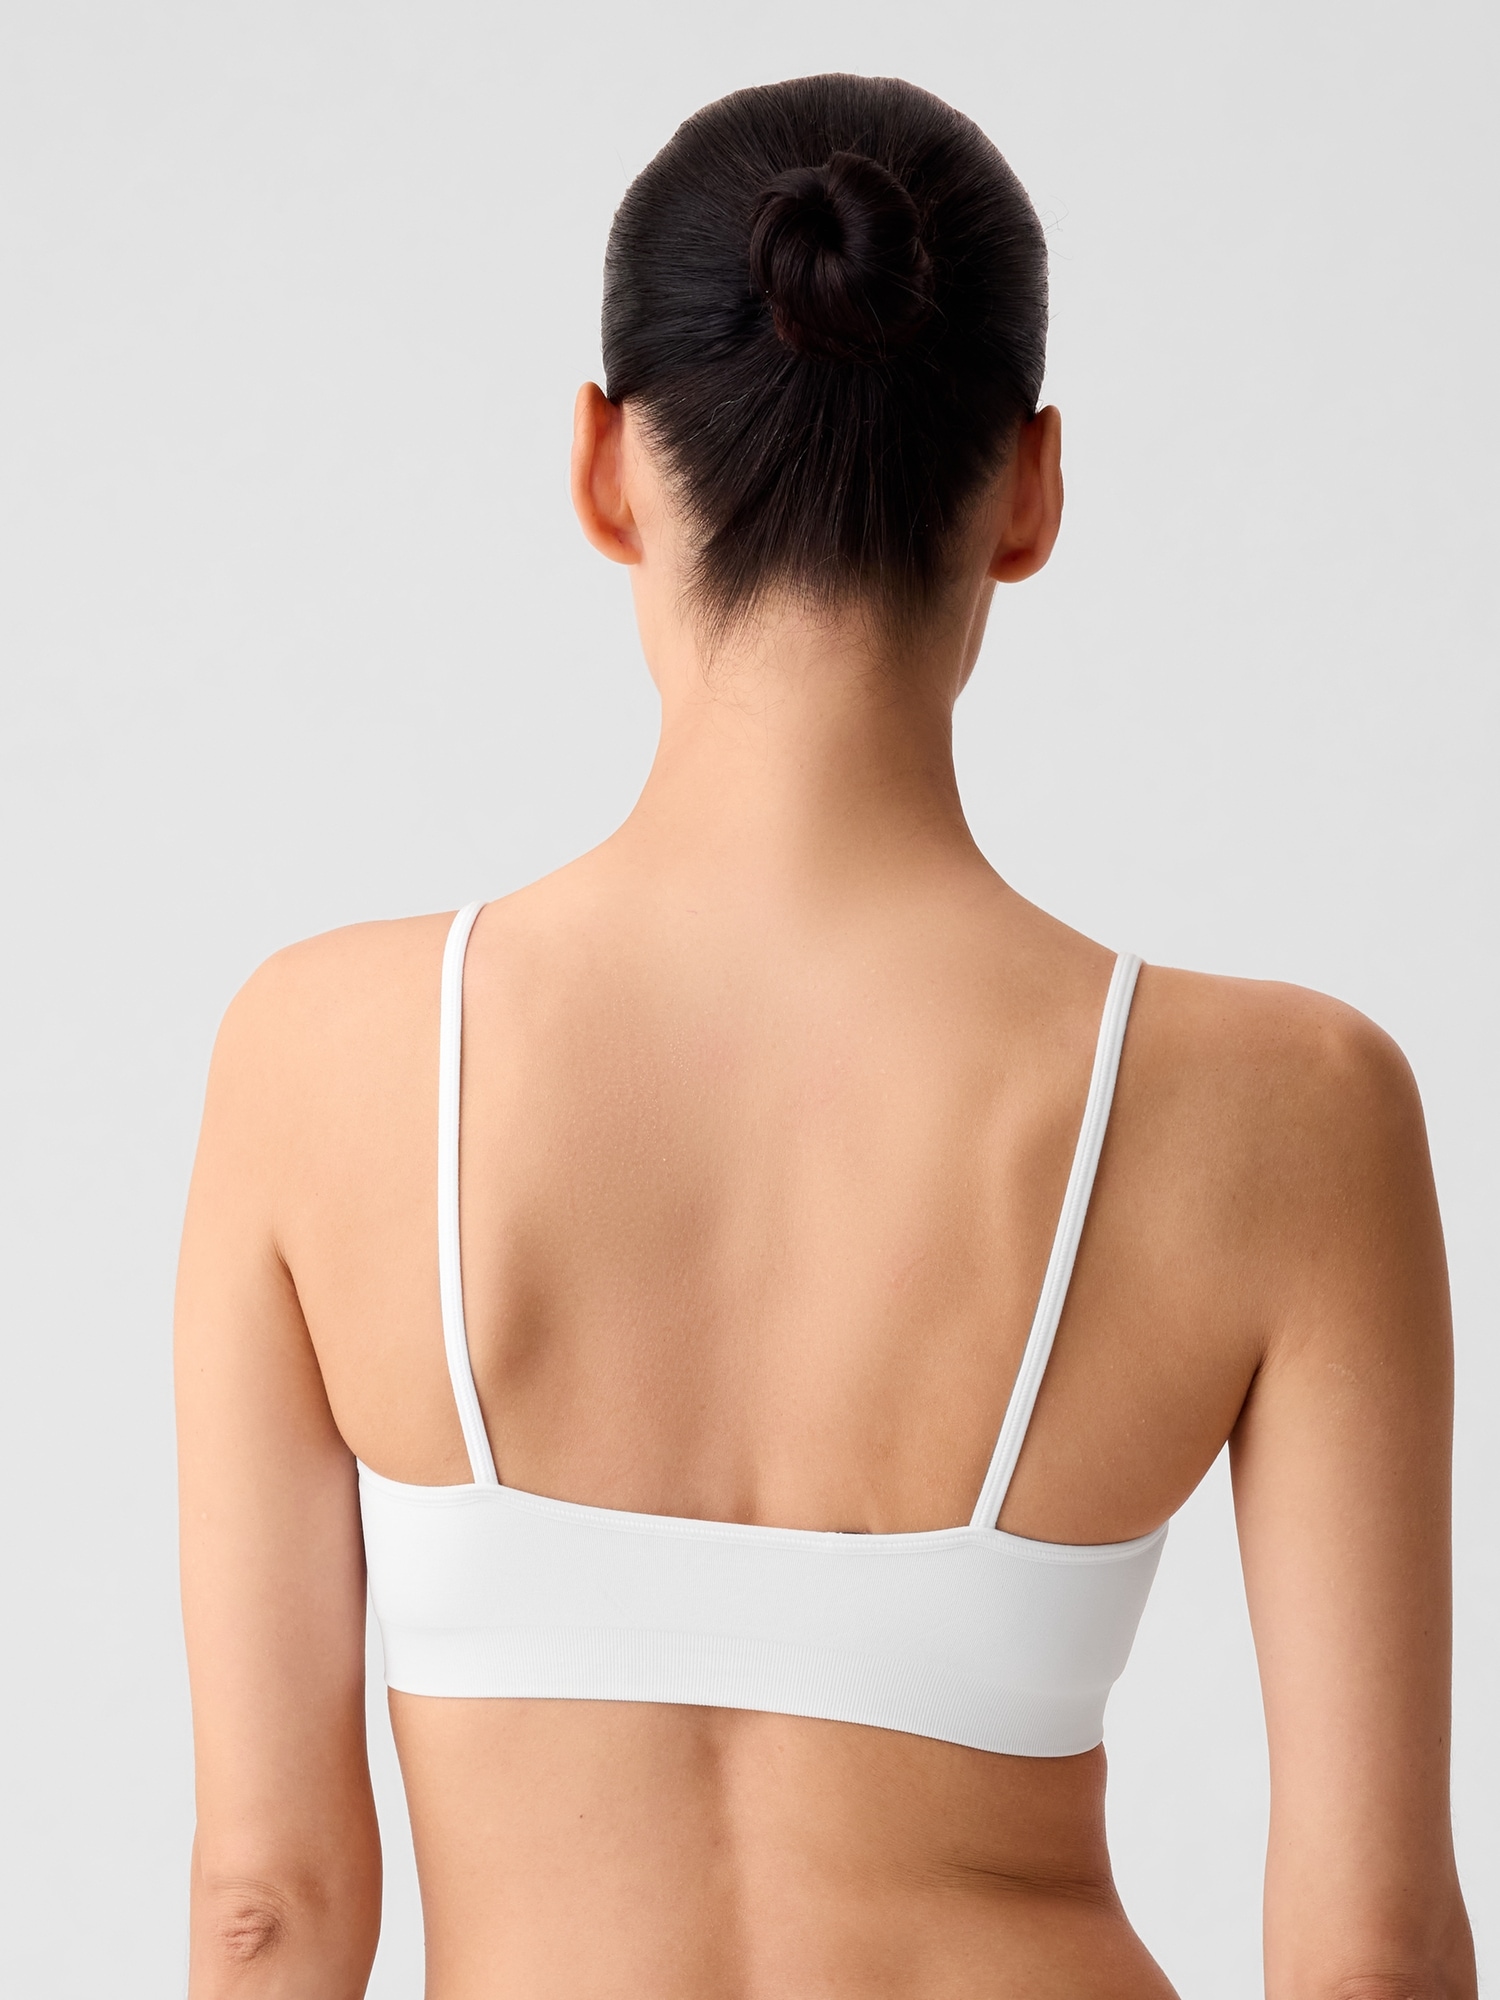 Buy Gap Seamless Ribbed Bralette from the Gap online shop